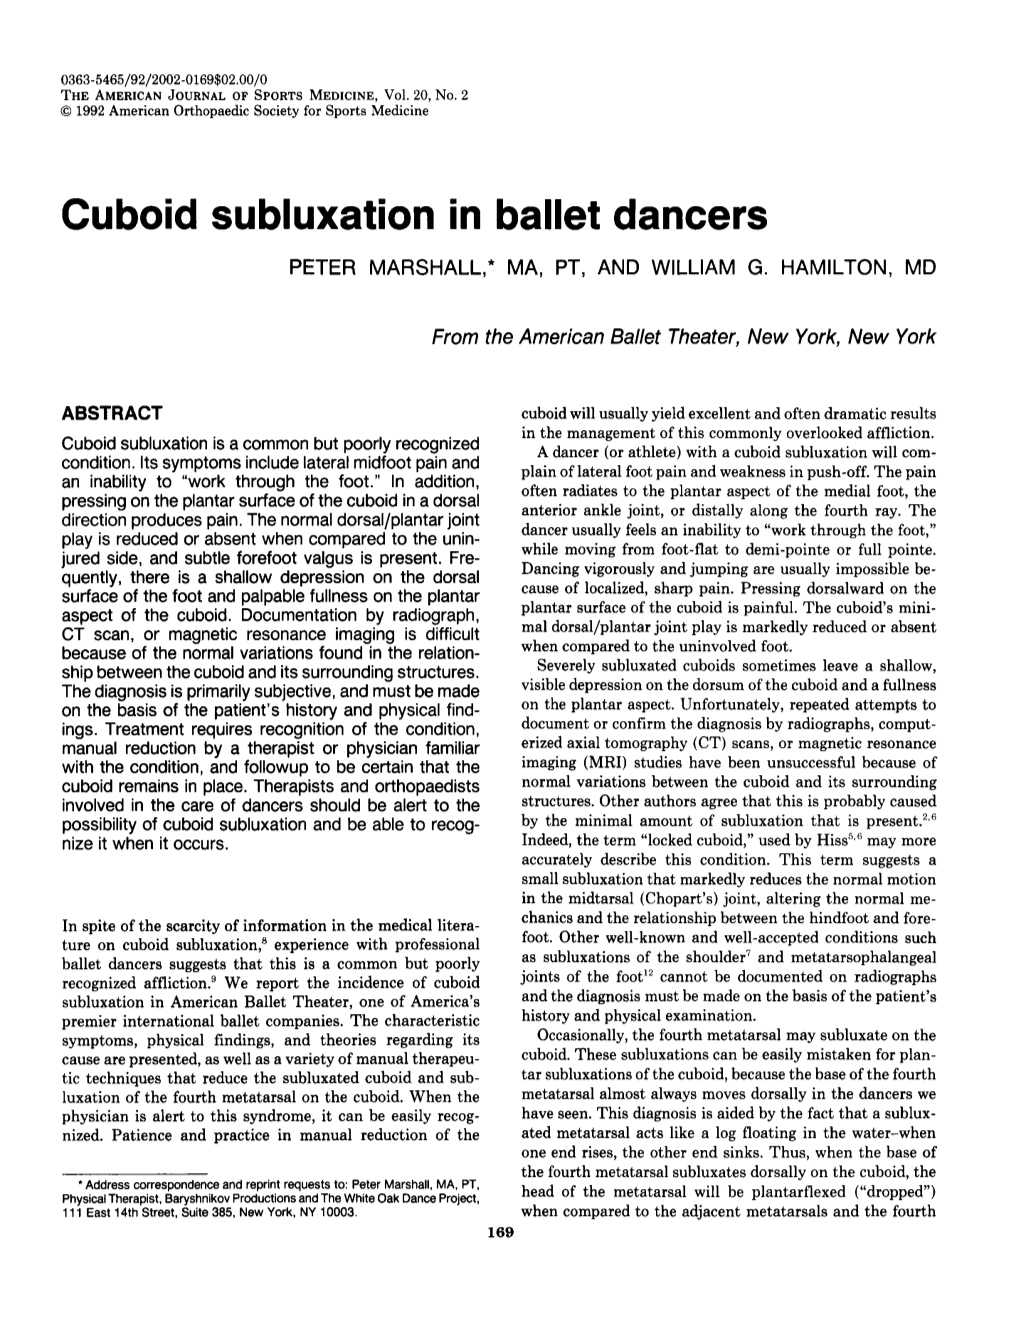 Cuboid Subluxation in Ballet Dancers PETER MARSHALL,* MA, PT, and WILLIAM G